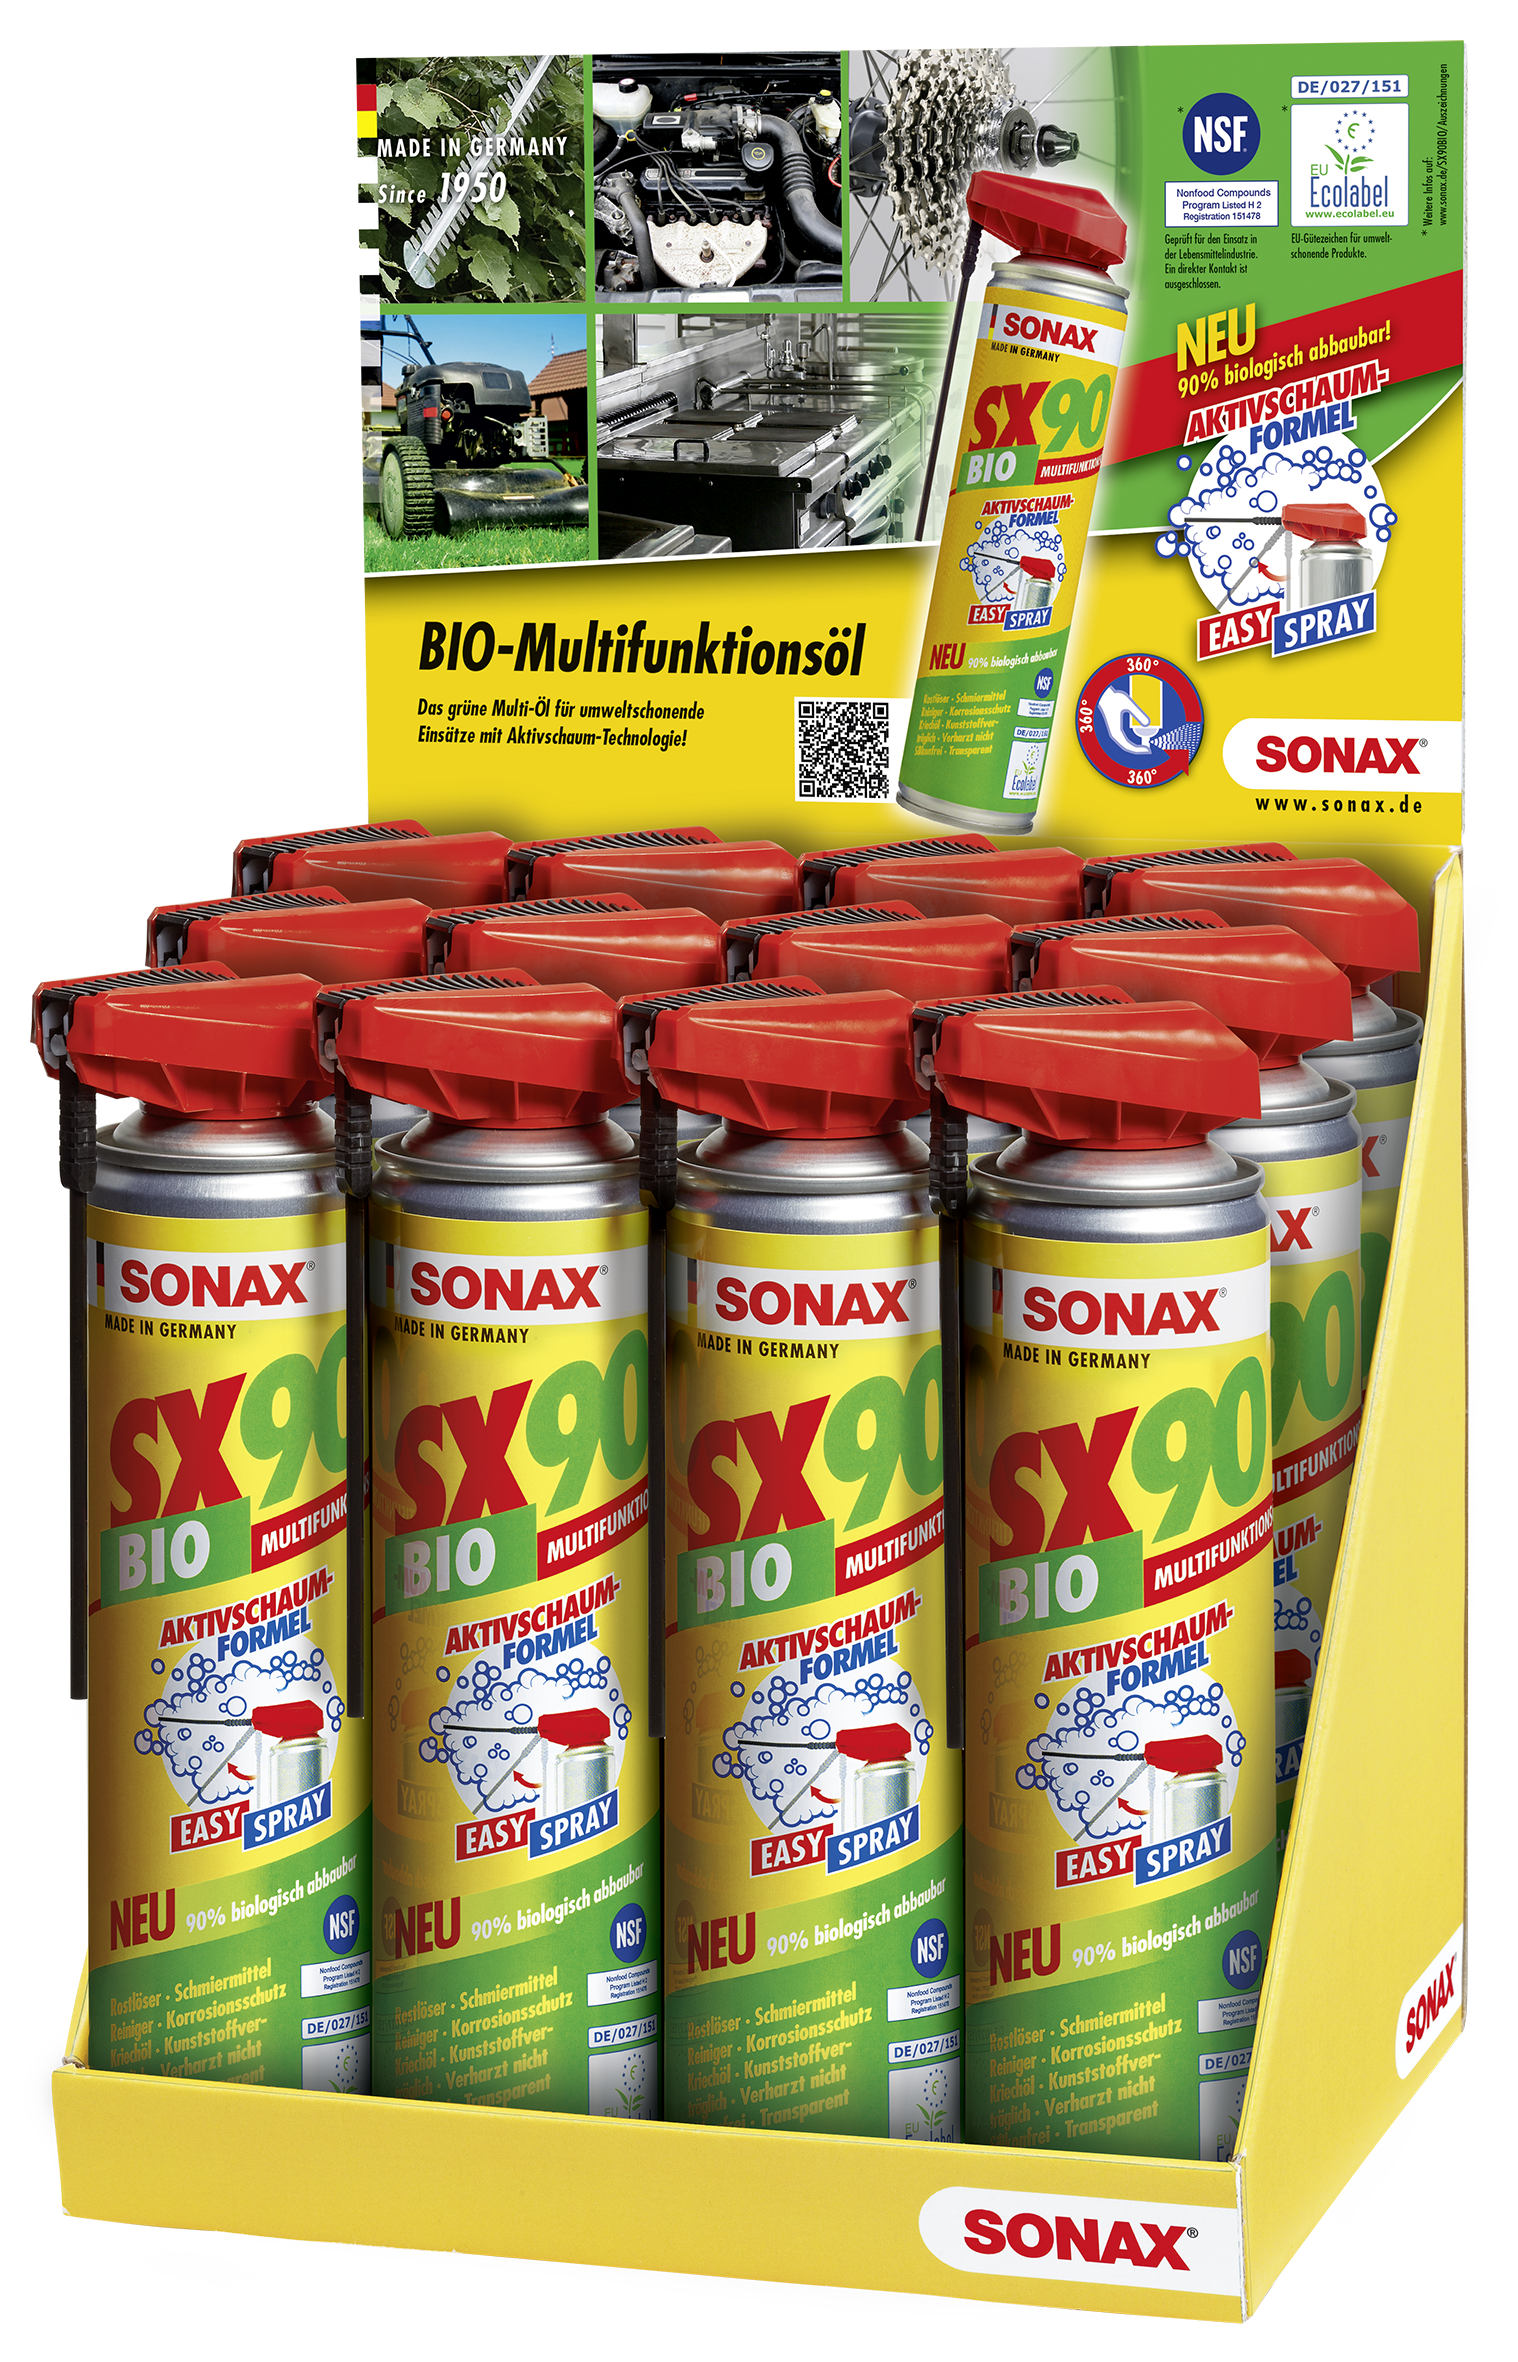 Product image download - SONAX Media - site 5